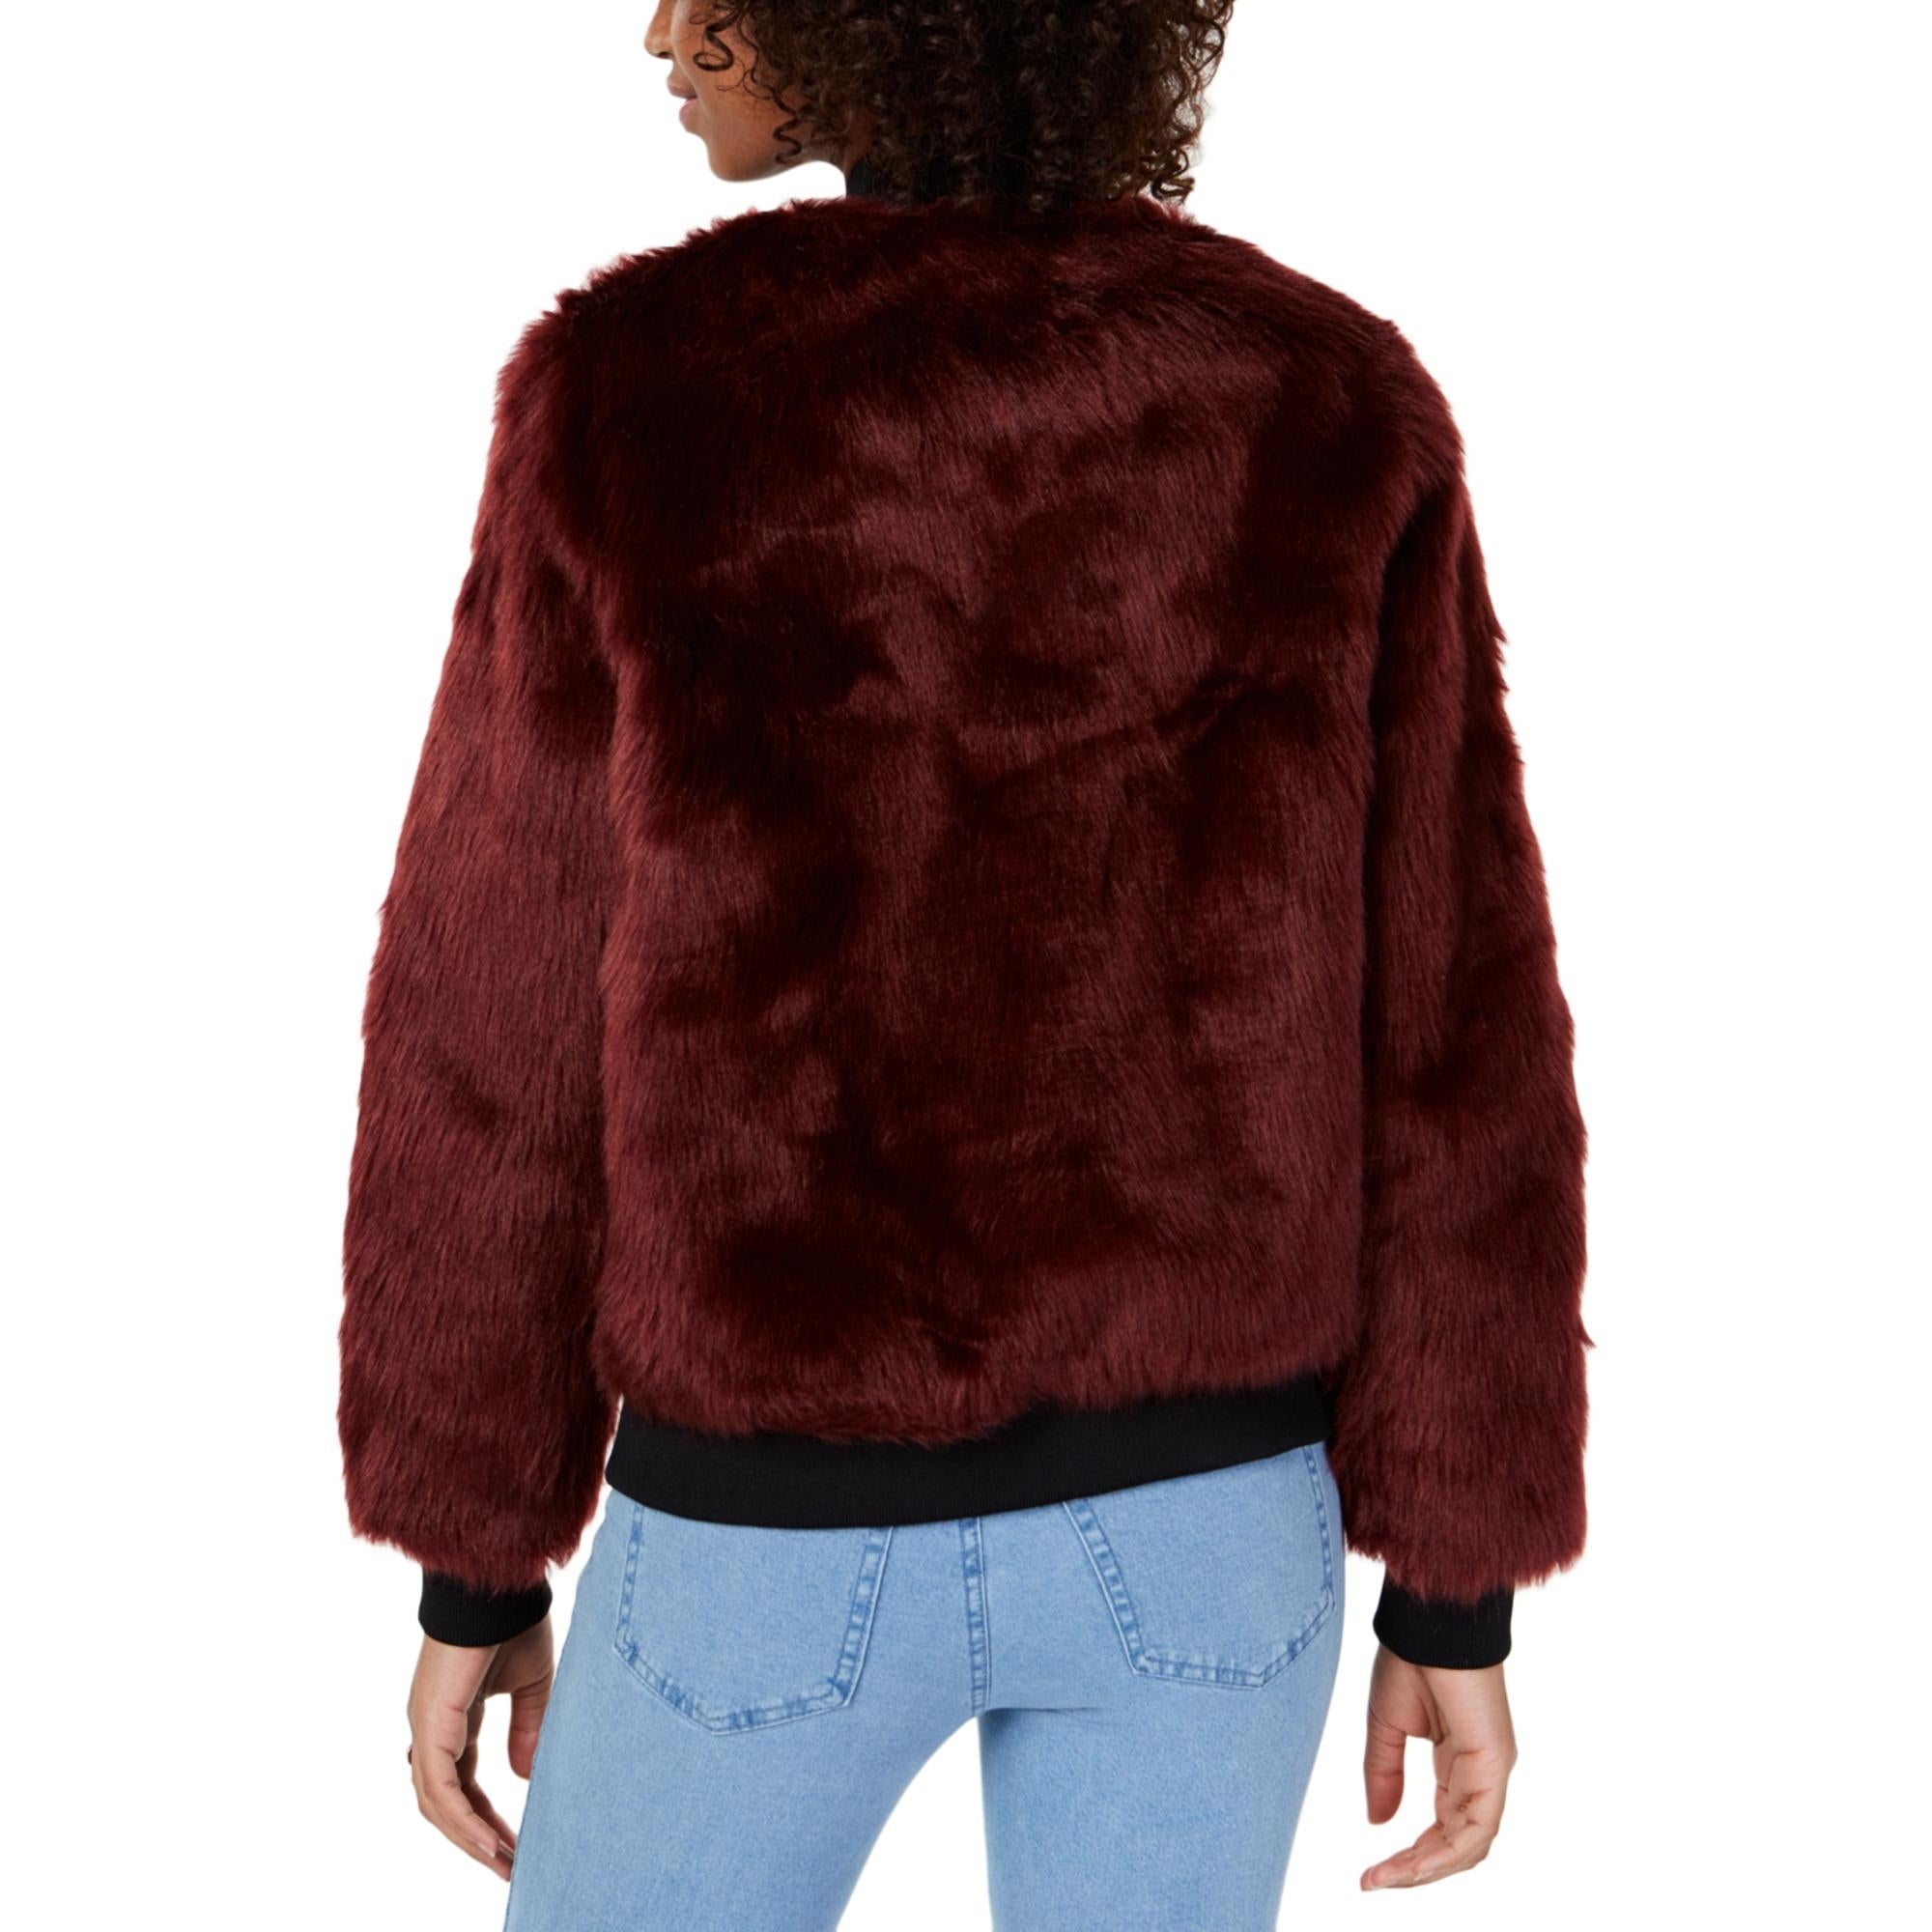 Say What? Juniors' Faux-Fur Jacket Red Size Extra Large - image 2 of 3